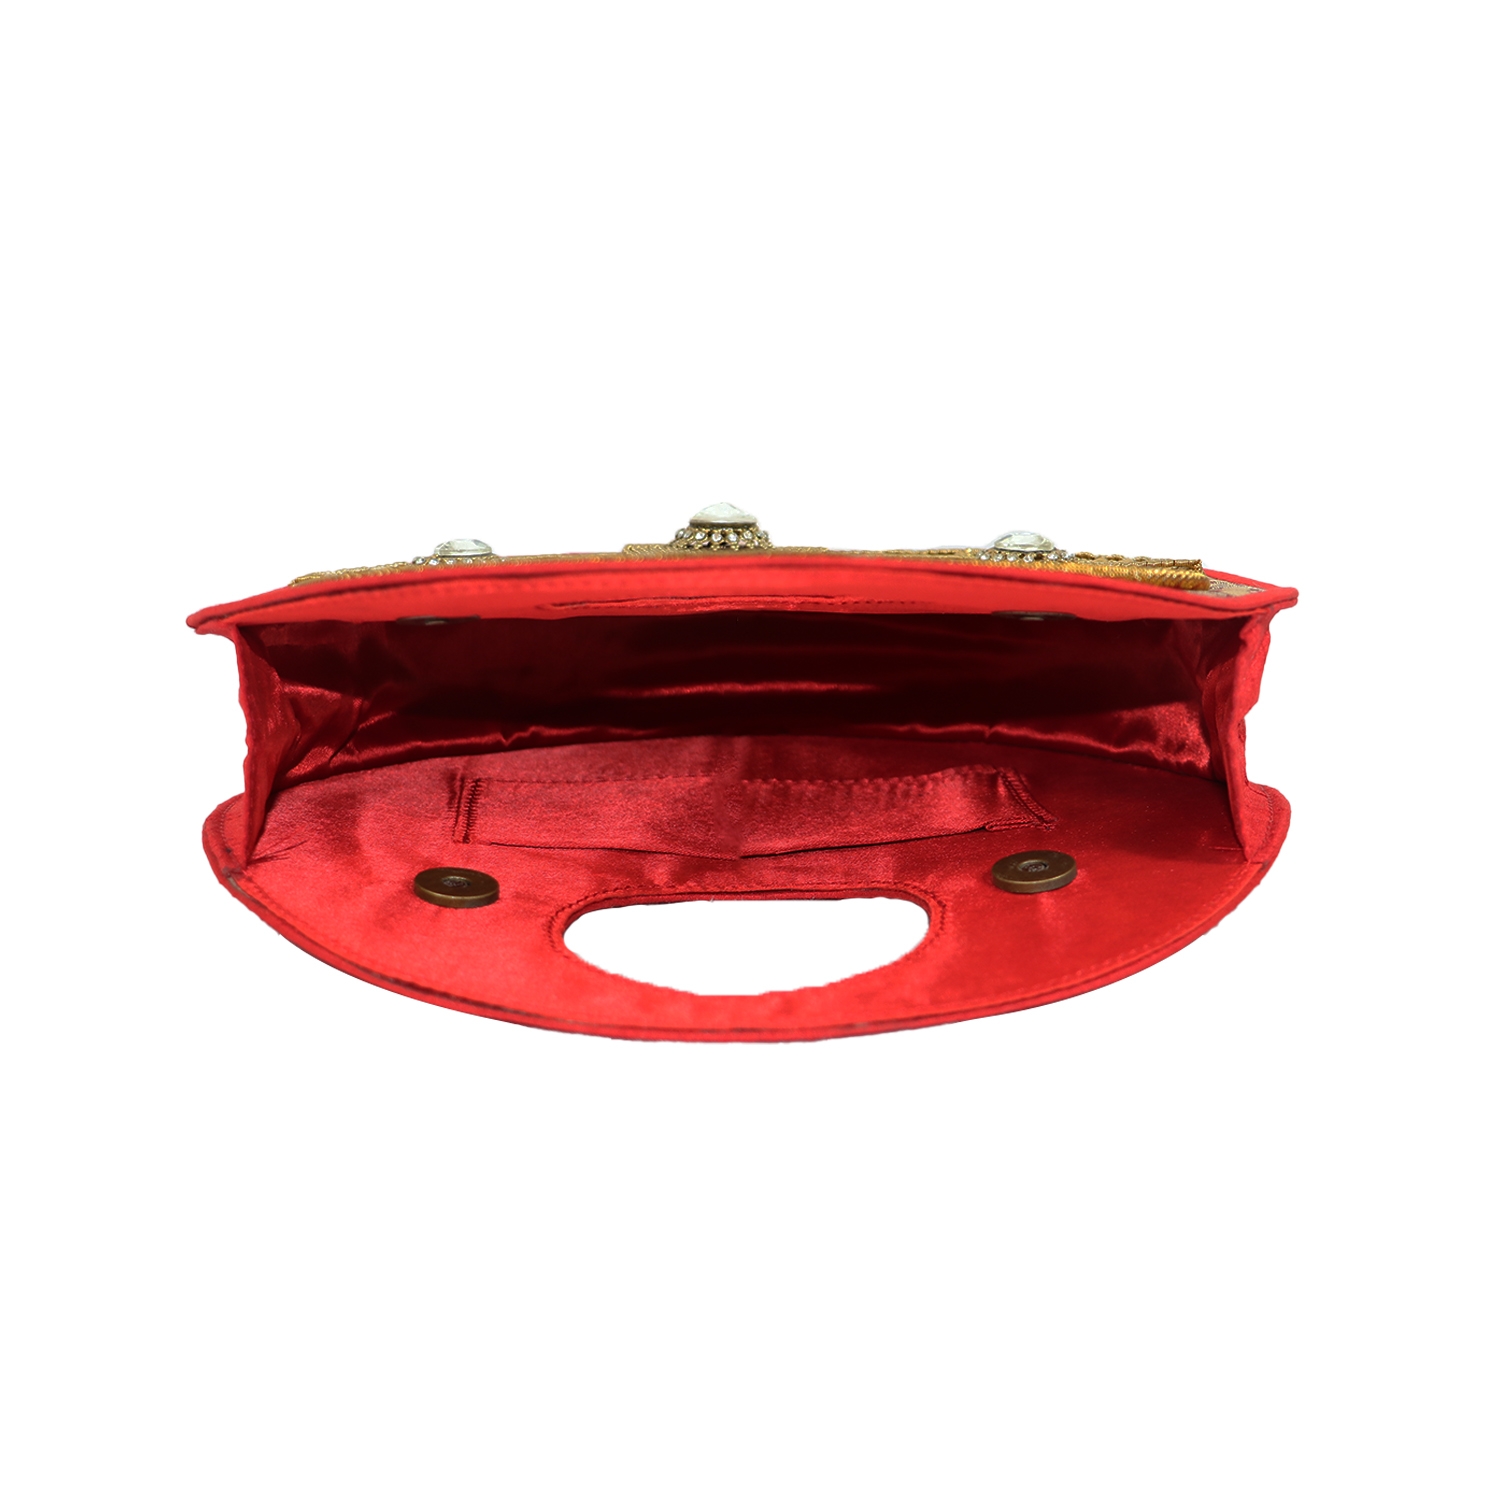 EMM | Women's Embroidered Round Party Clutch 4